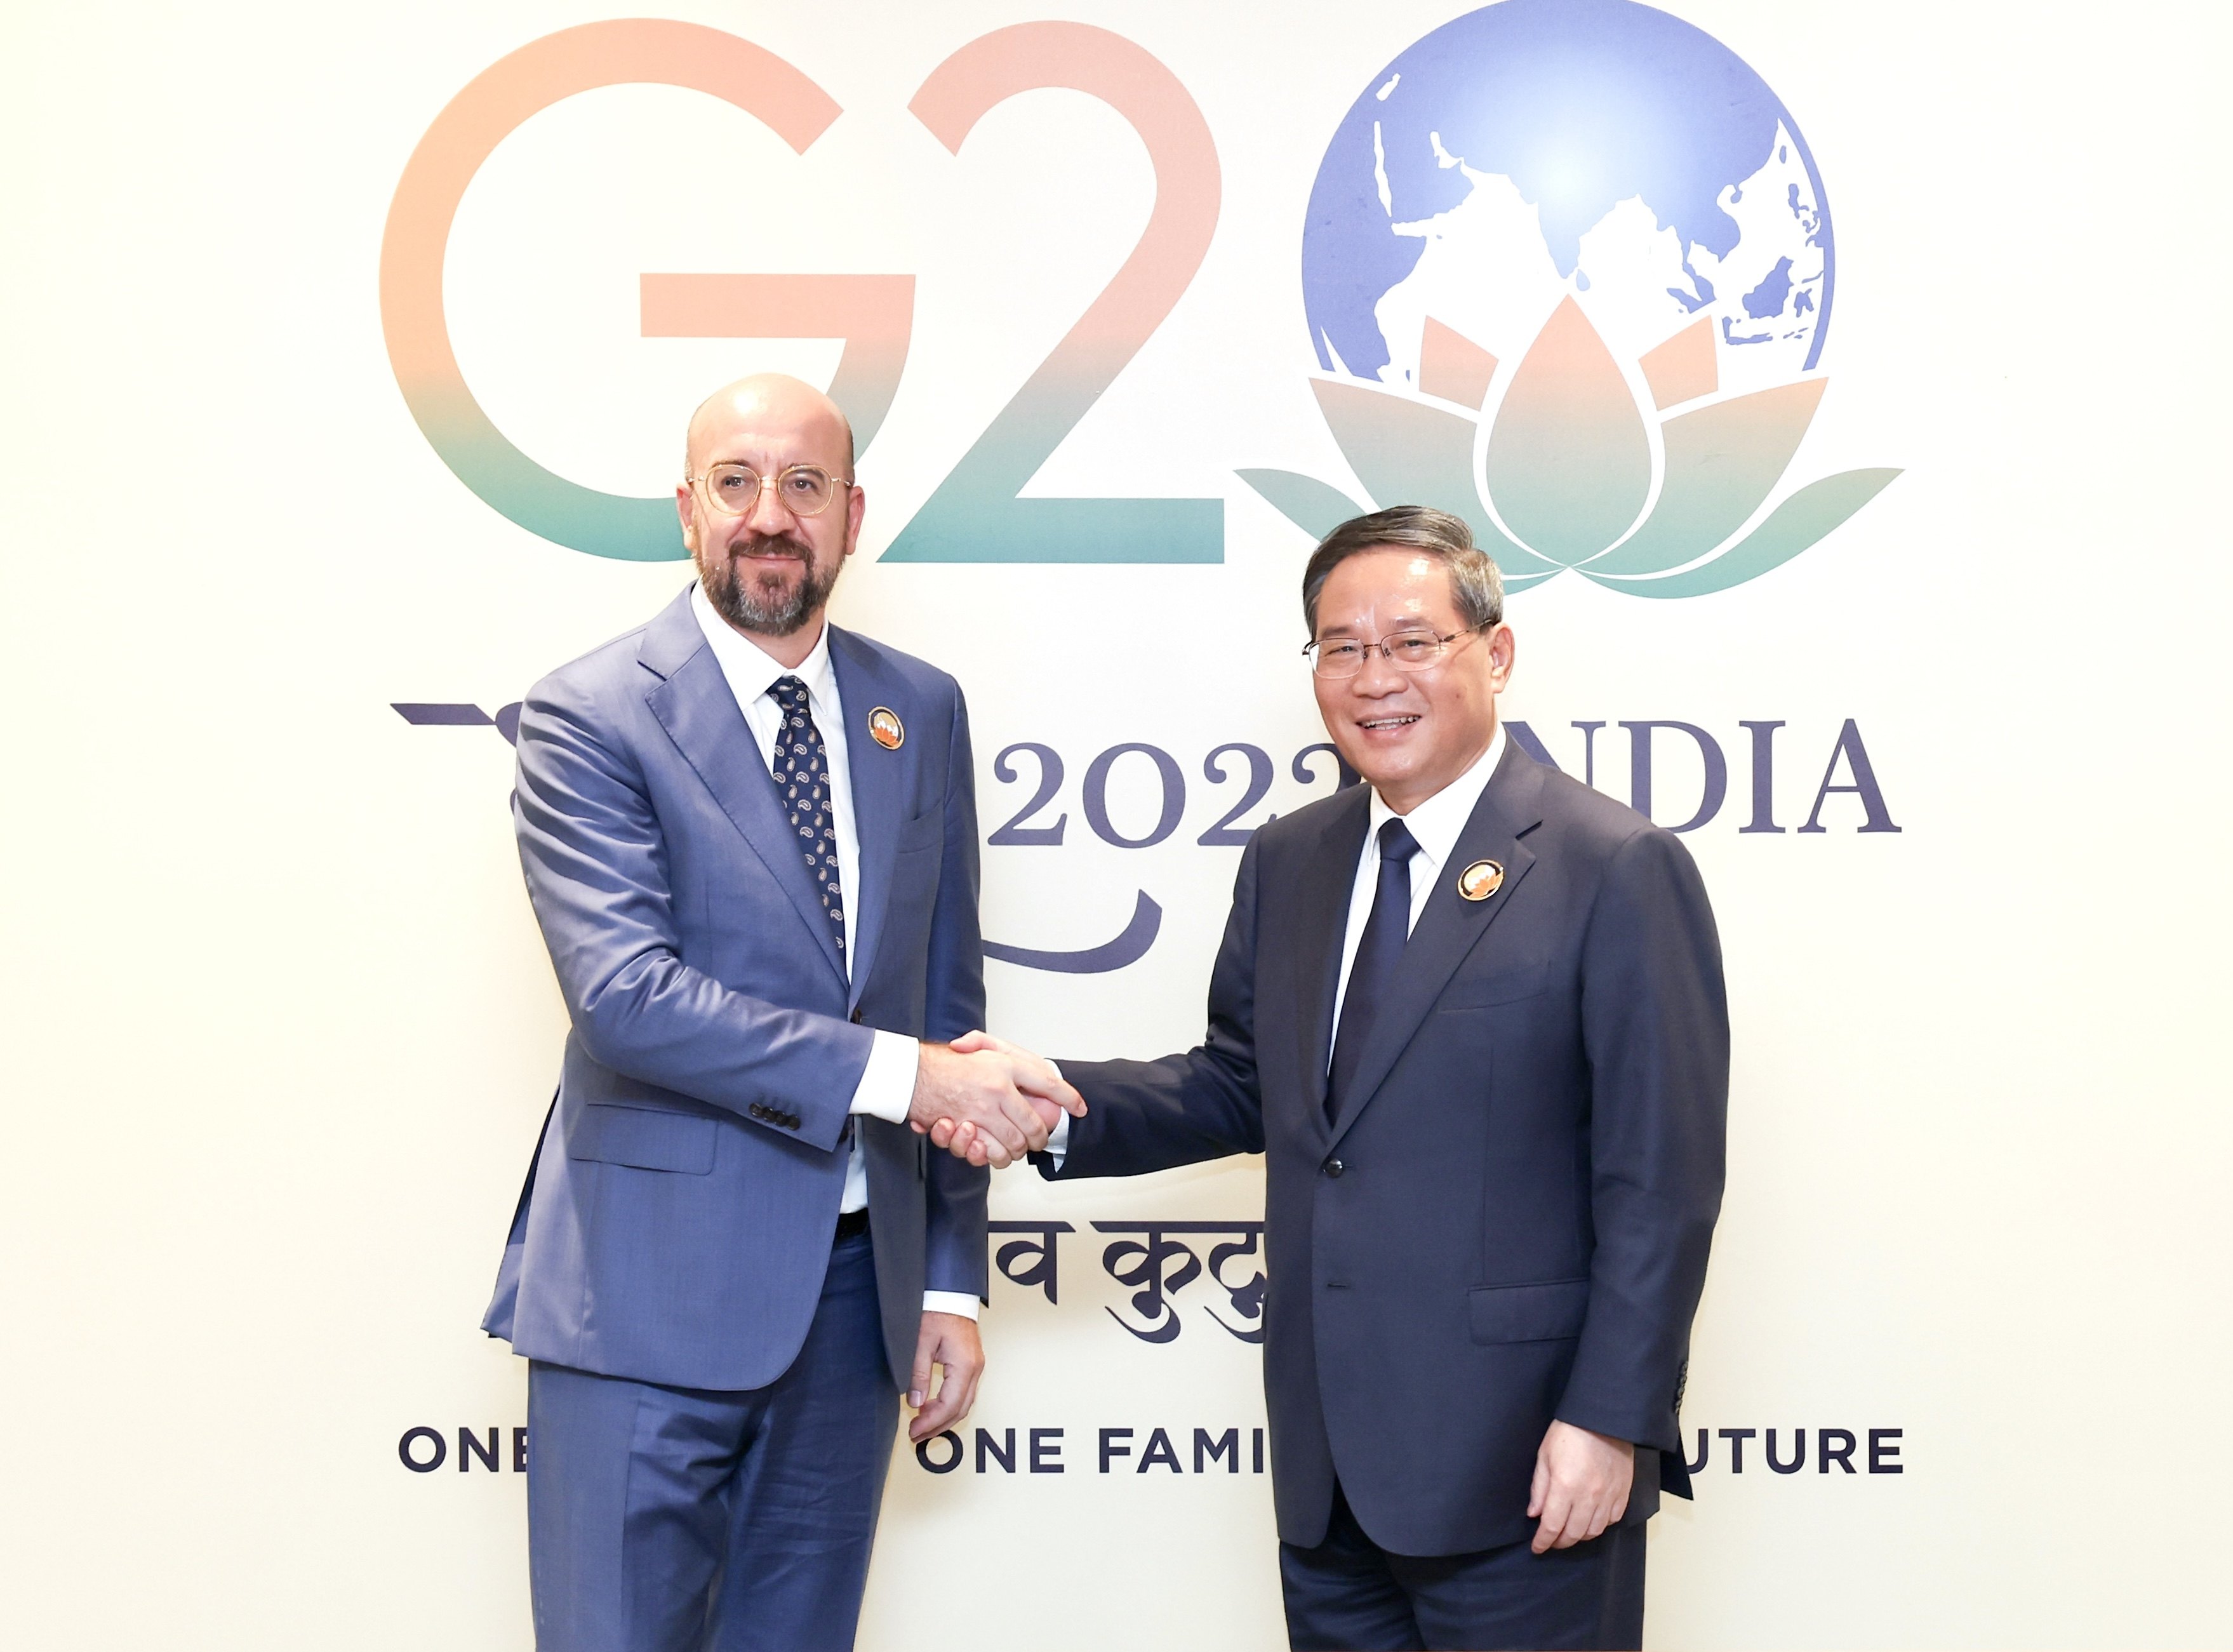 European Council President Charles Michel meets Chinese Premier Li Qiang on the sidelines of the G20 summit in New Delhi, India, on Sunday. Photo: Xinhua